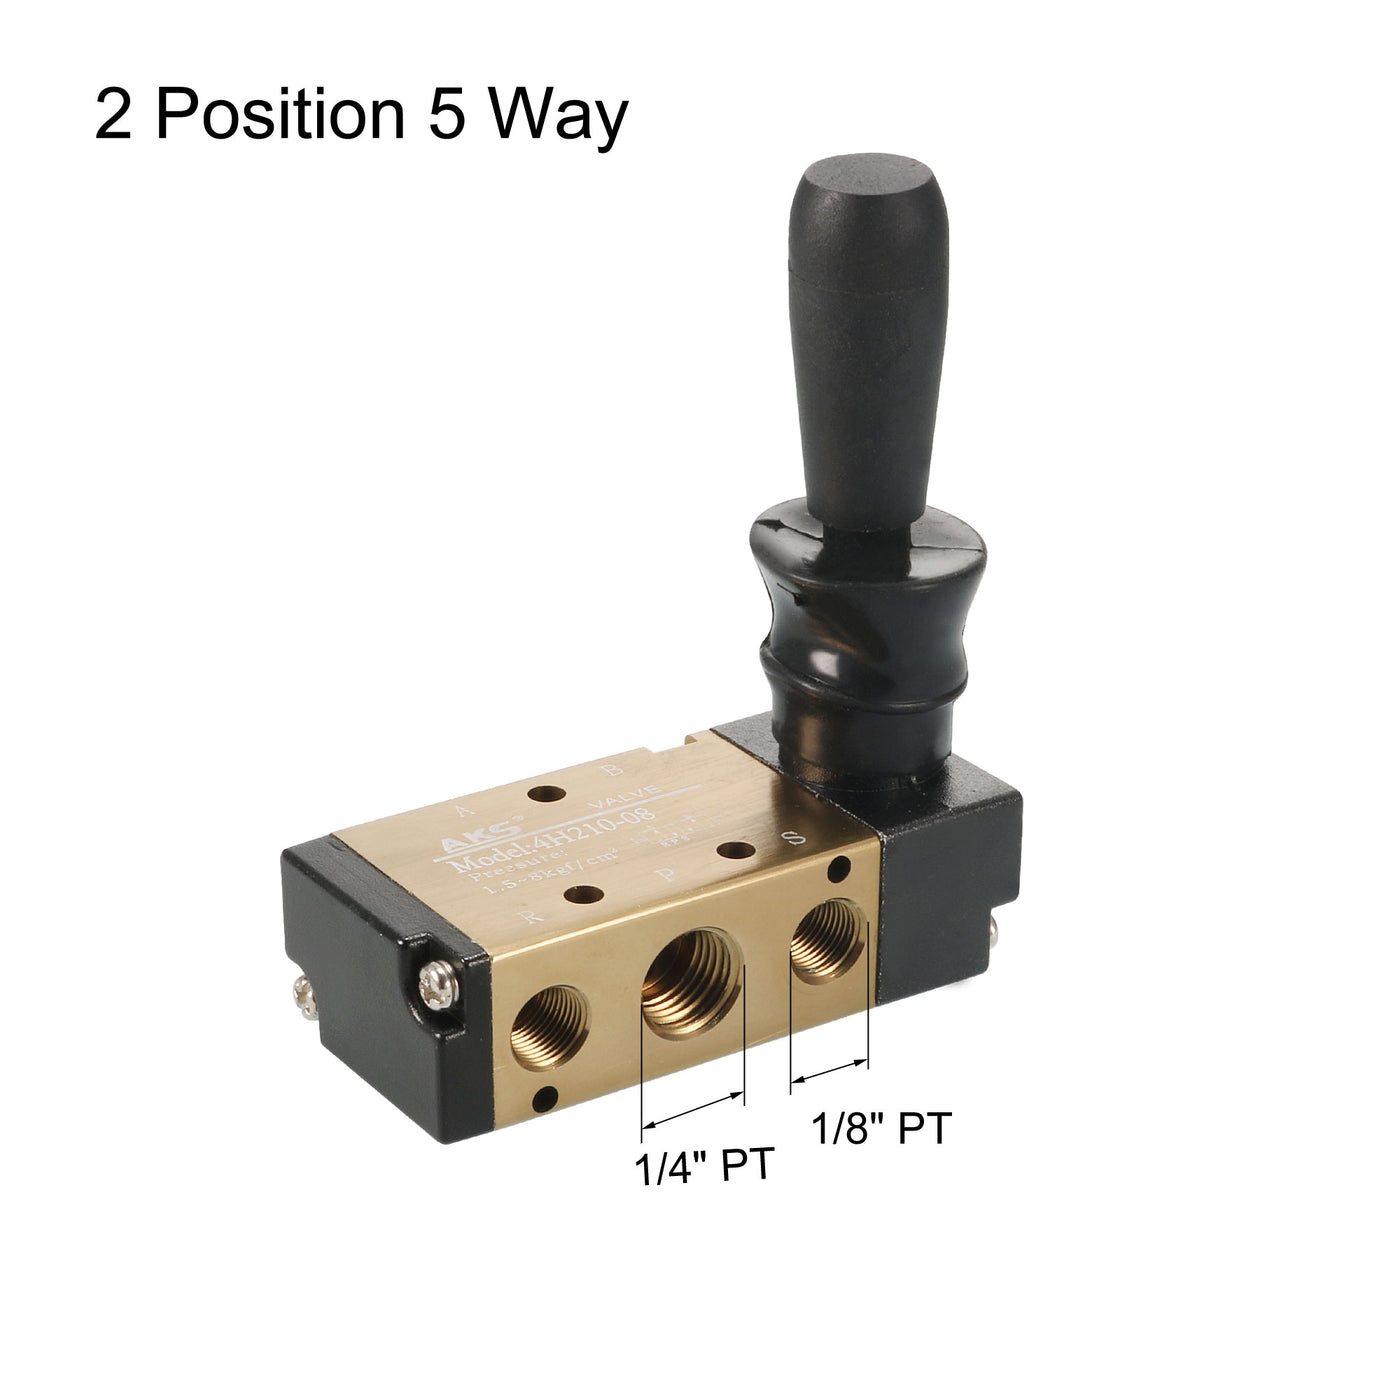 uxcell Uxcell Manual Hand Pull Solenoid Valve 2 Position 5 Way Pneumatic 1/4" PT Air Hand Lever Operated Valve with 4mm OD Connect Fitting and Brass Exhaust Muffler